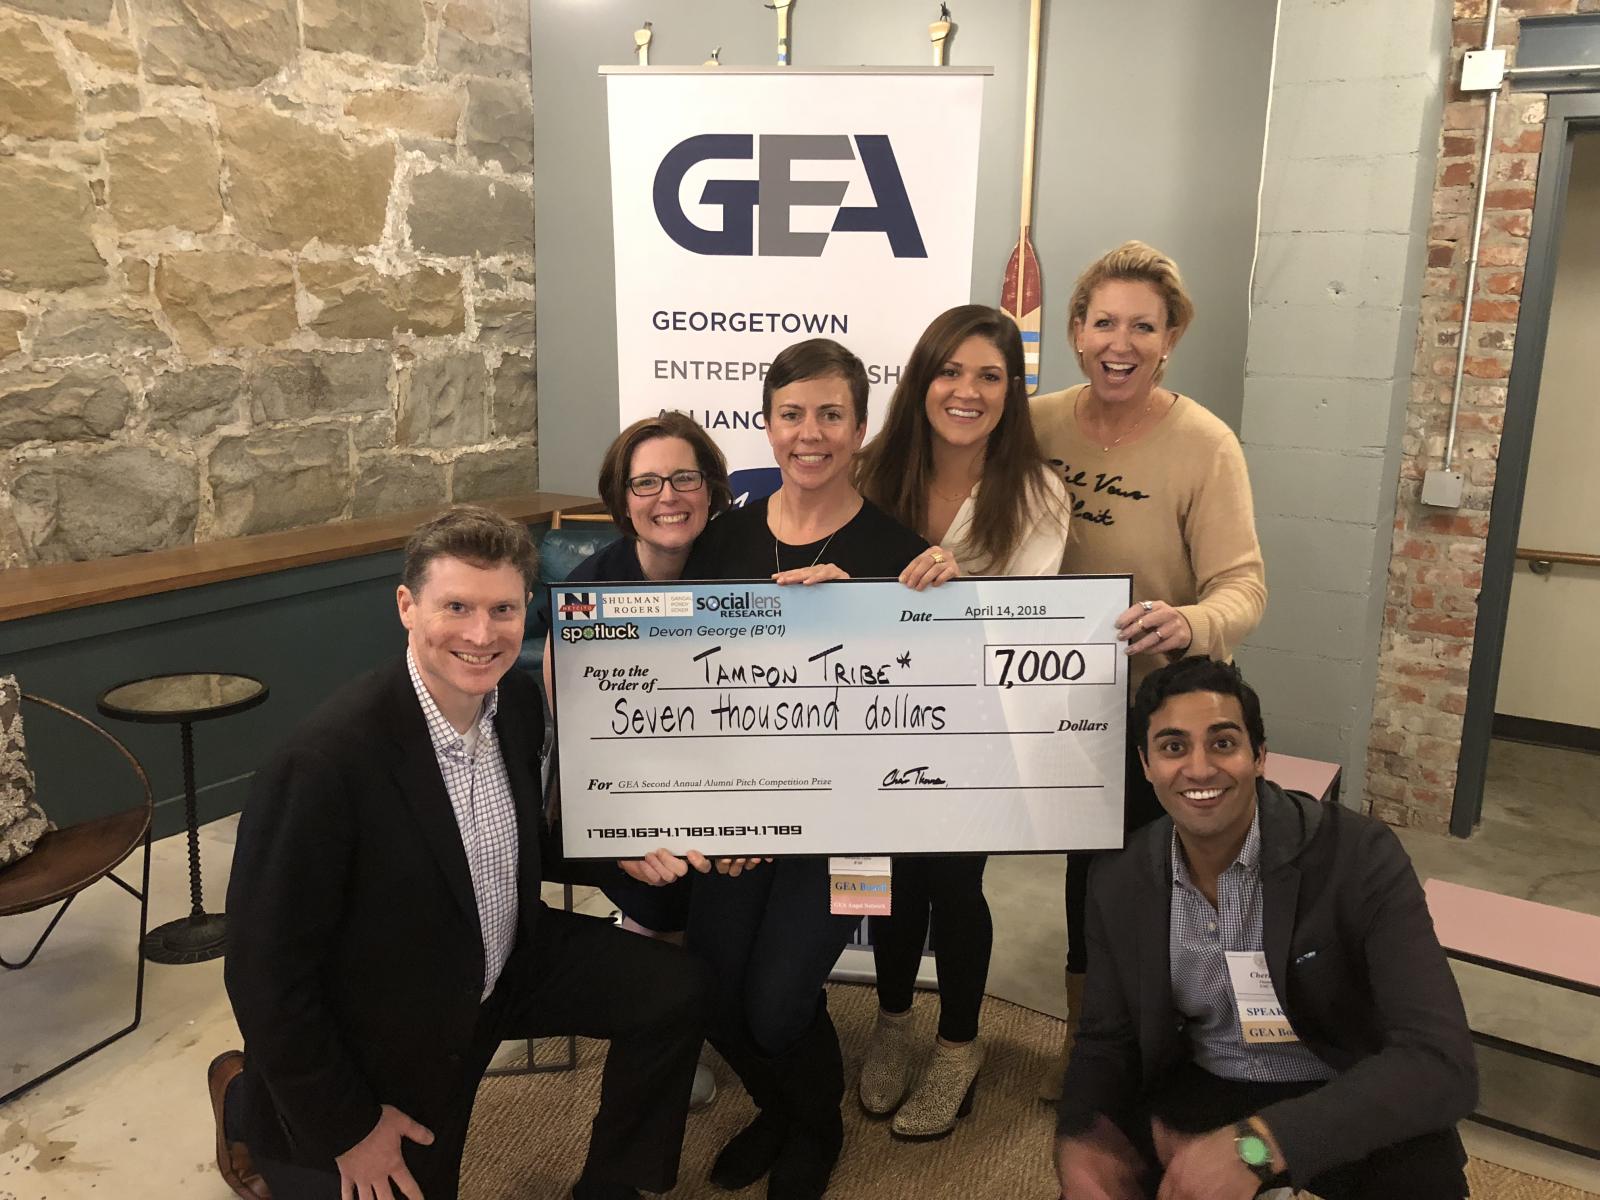 A group of six people in business attire including competition judges Giana Korth and Jennifer Eden pose with a large check for seven thousand dollars made out to Tampon Tribe. Giana Korth holds the check in front of a poster saying Georgetown Entrepreneurship Alliance.